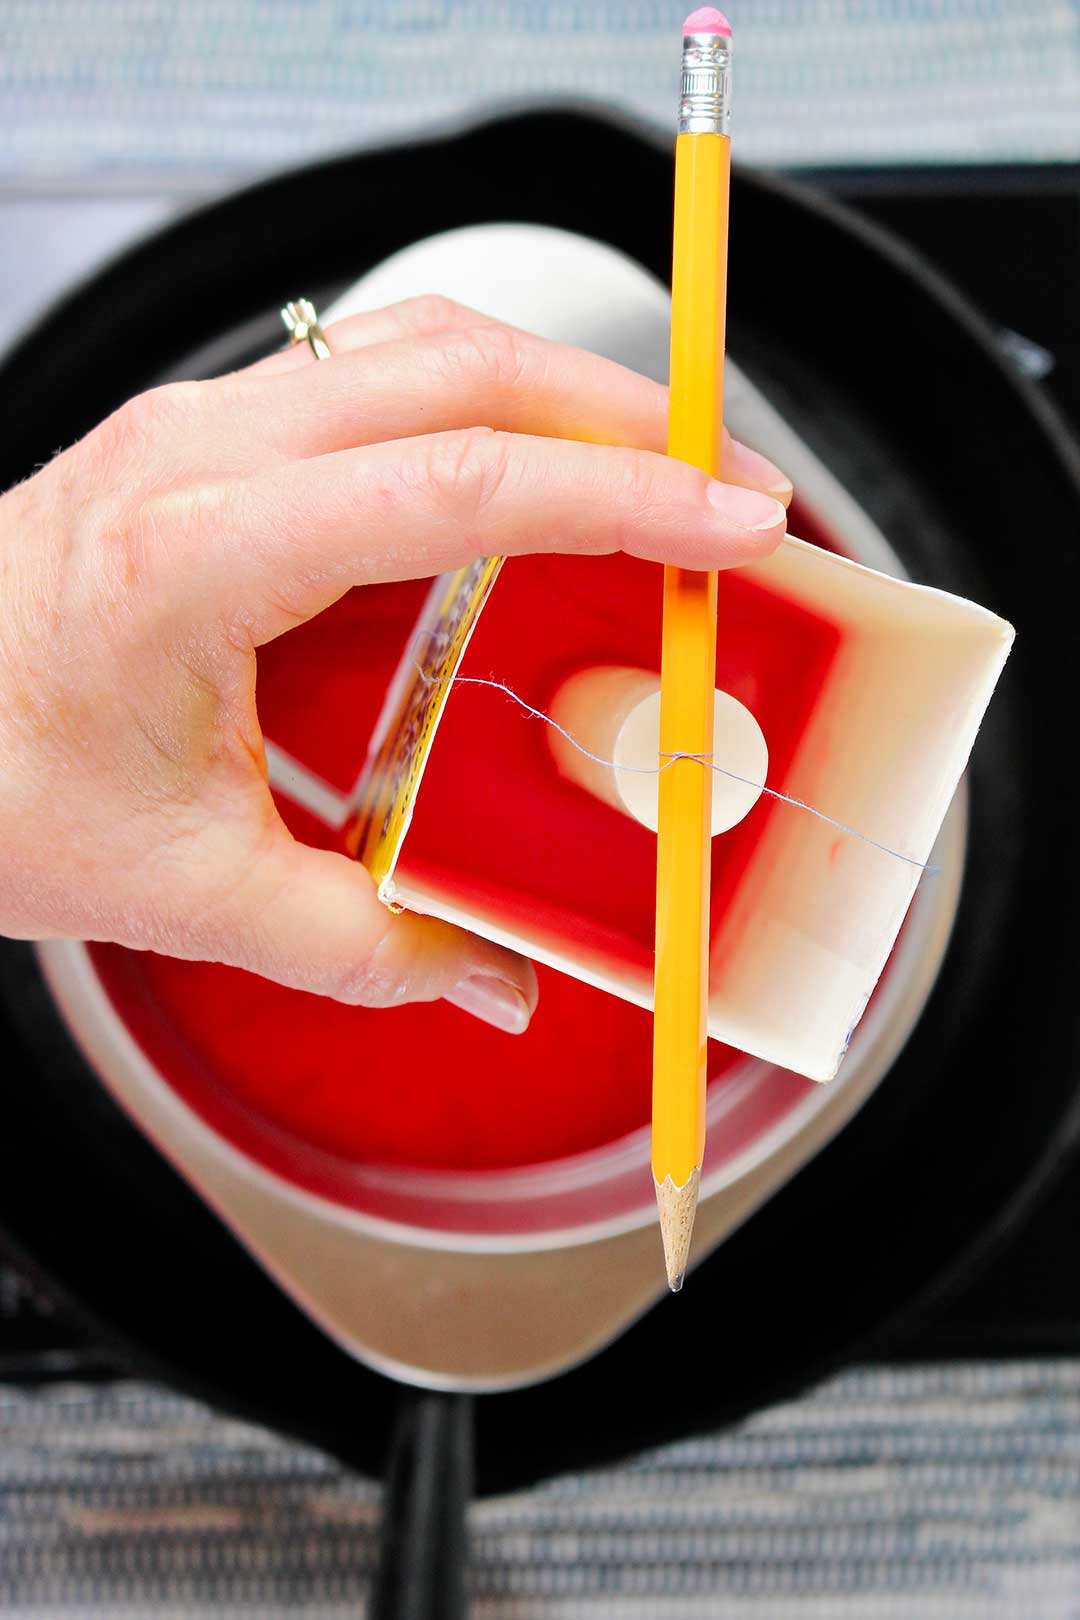 Person holding carton with melted wax inside with pencil holding wick in place.